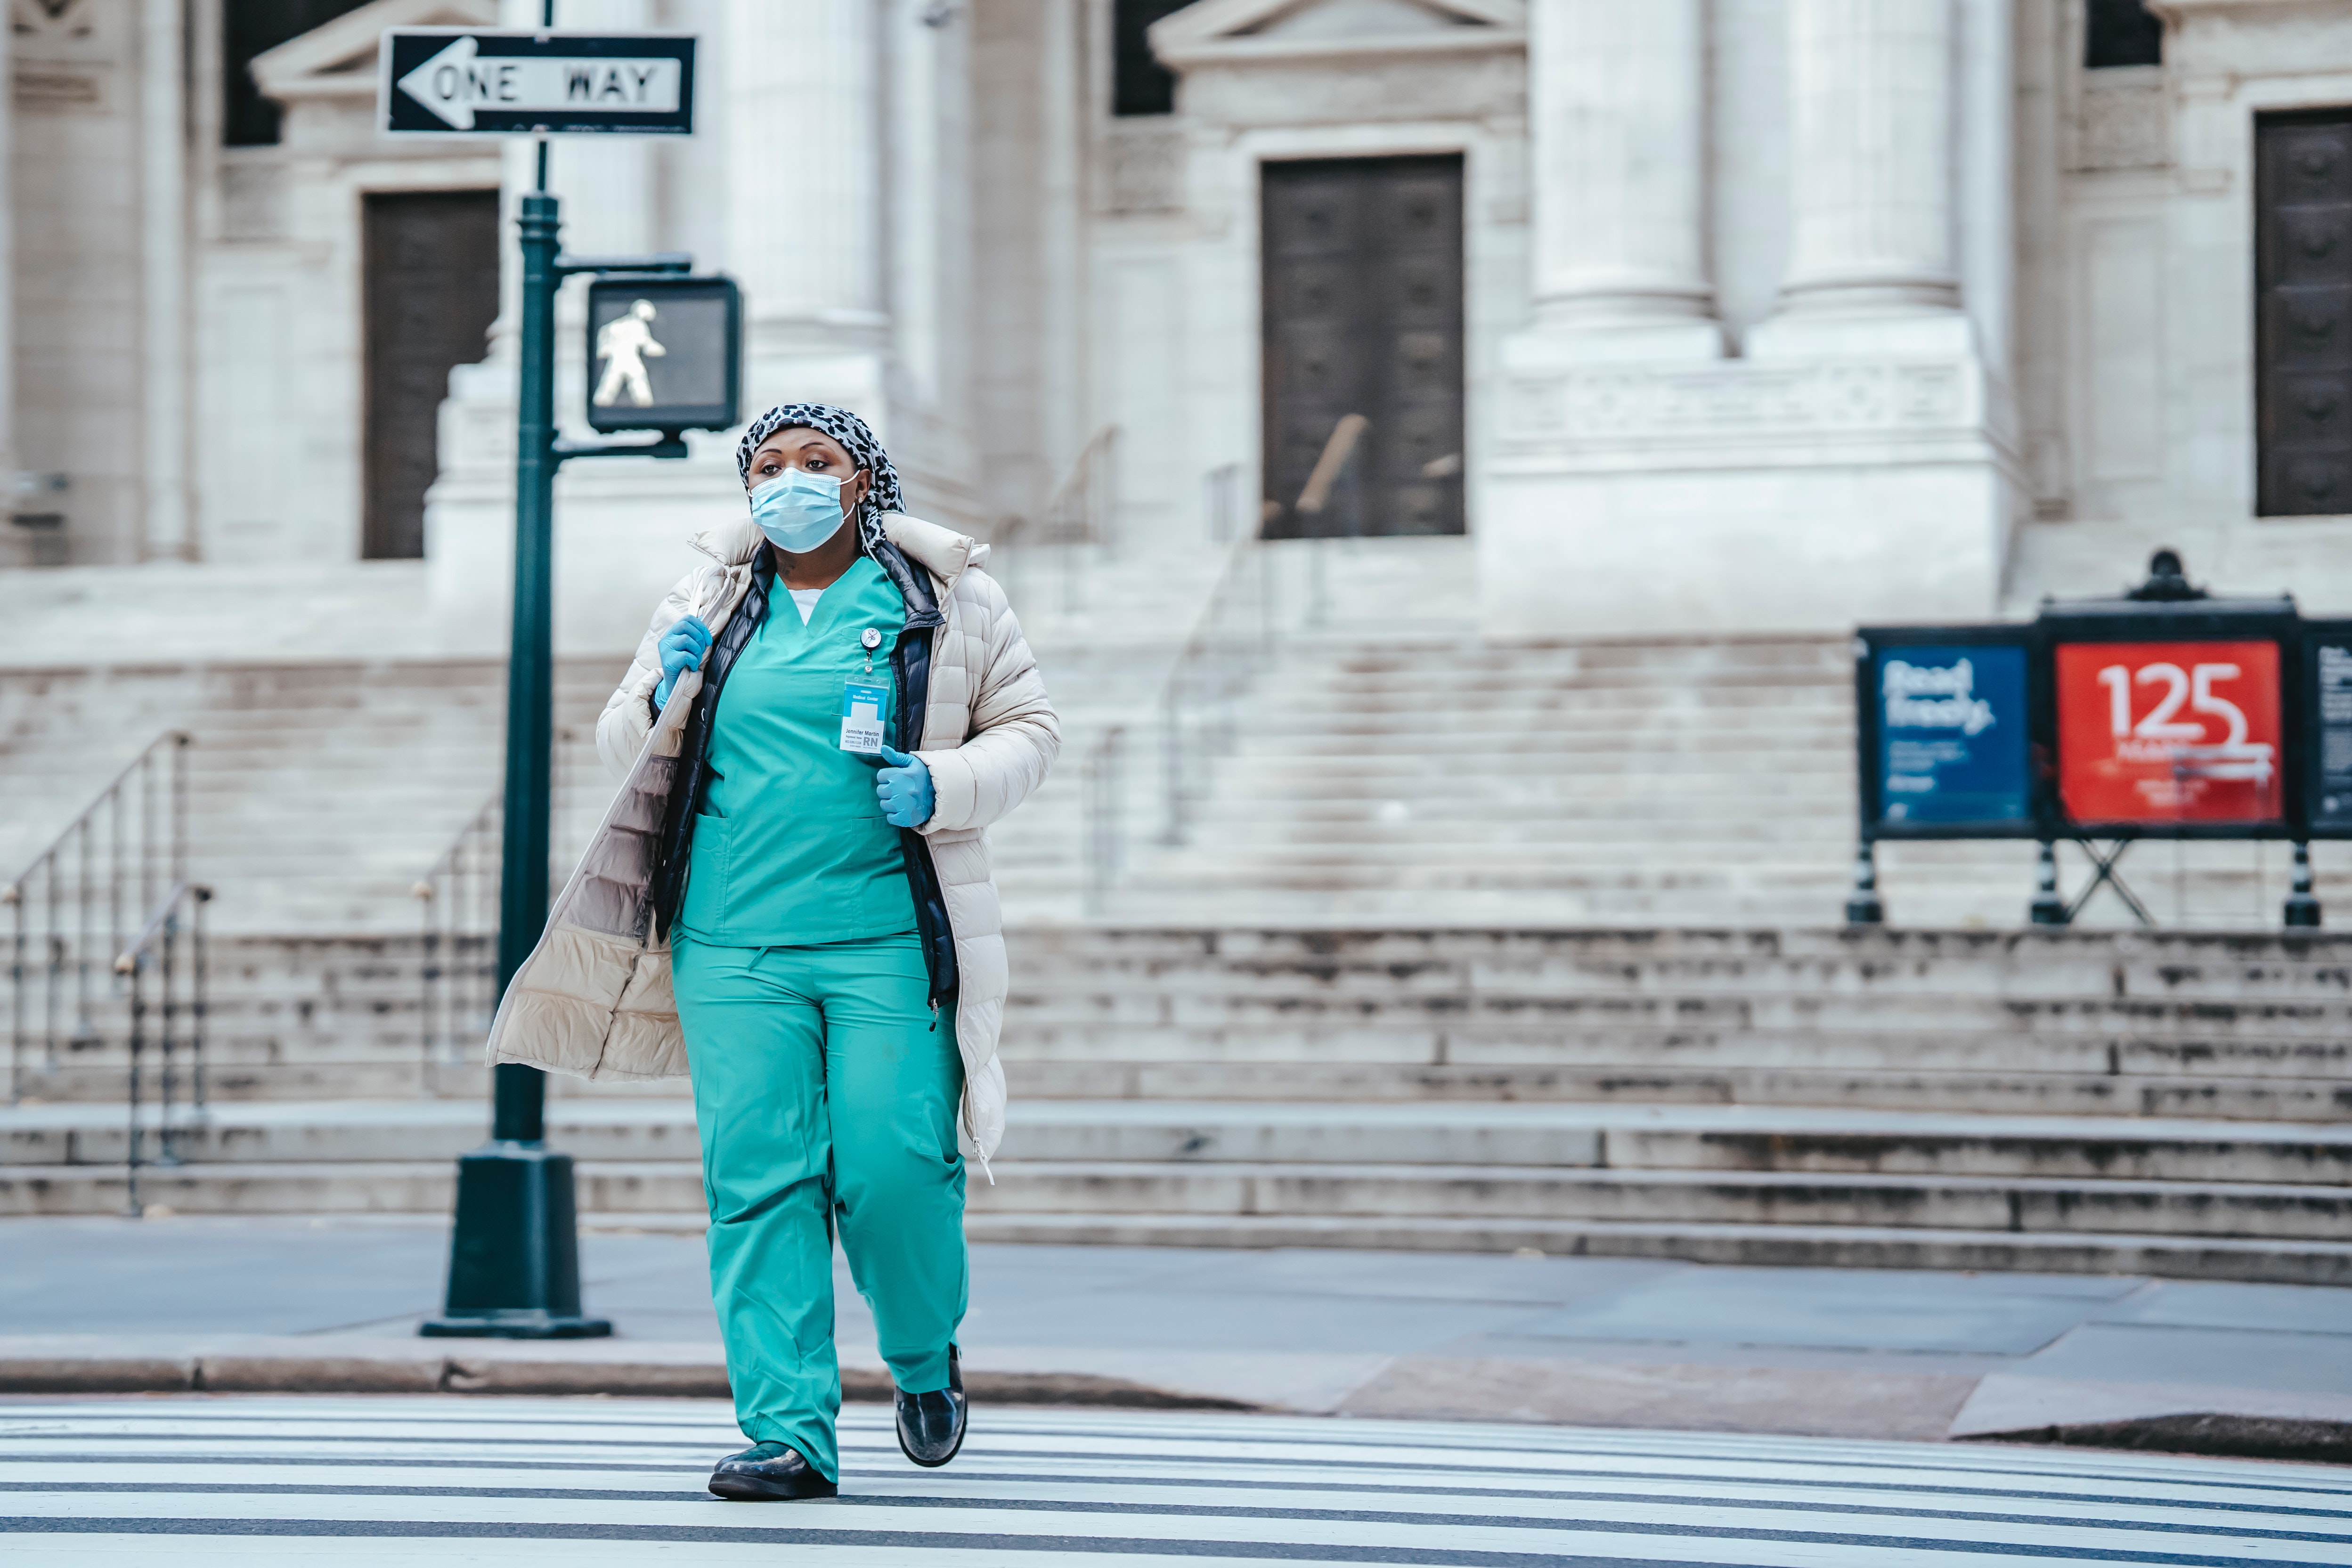 After a year of the pandemic, pressure is mounting to address economic disparity.